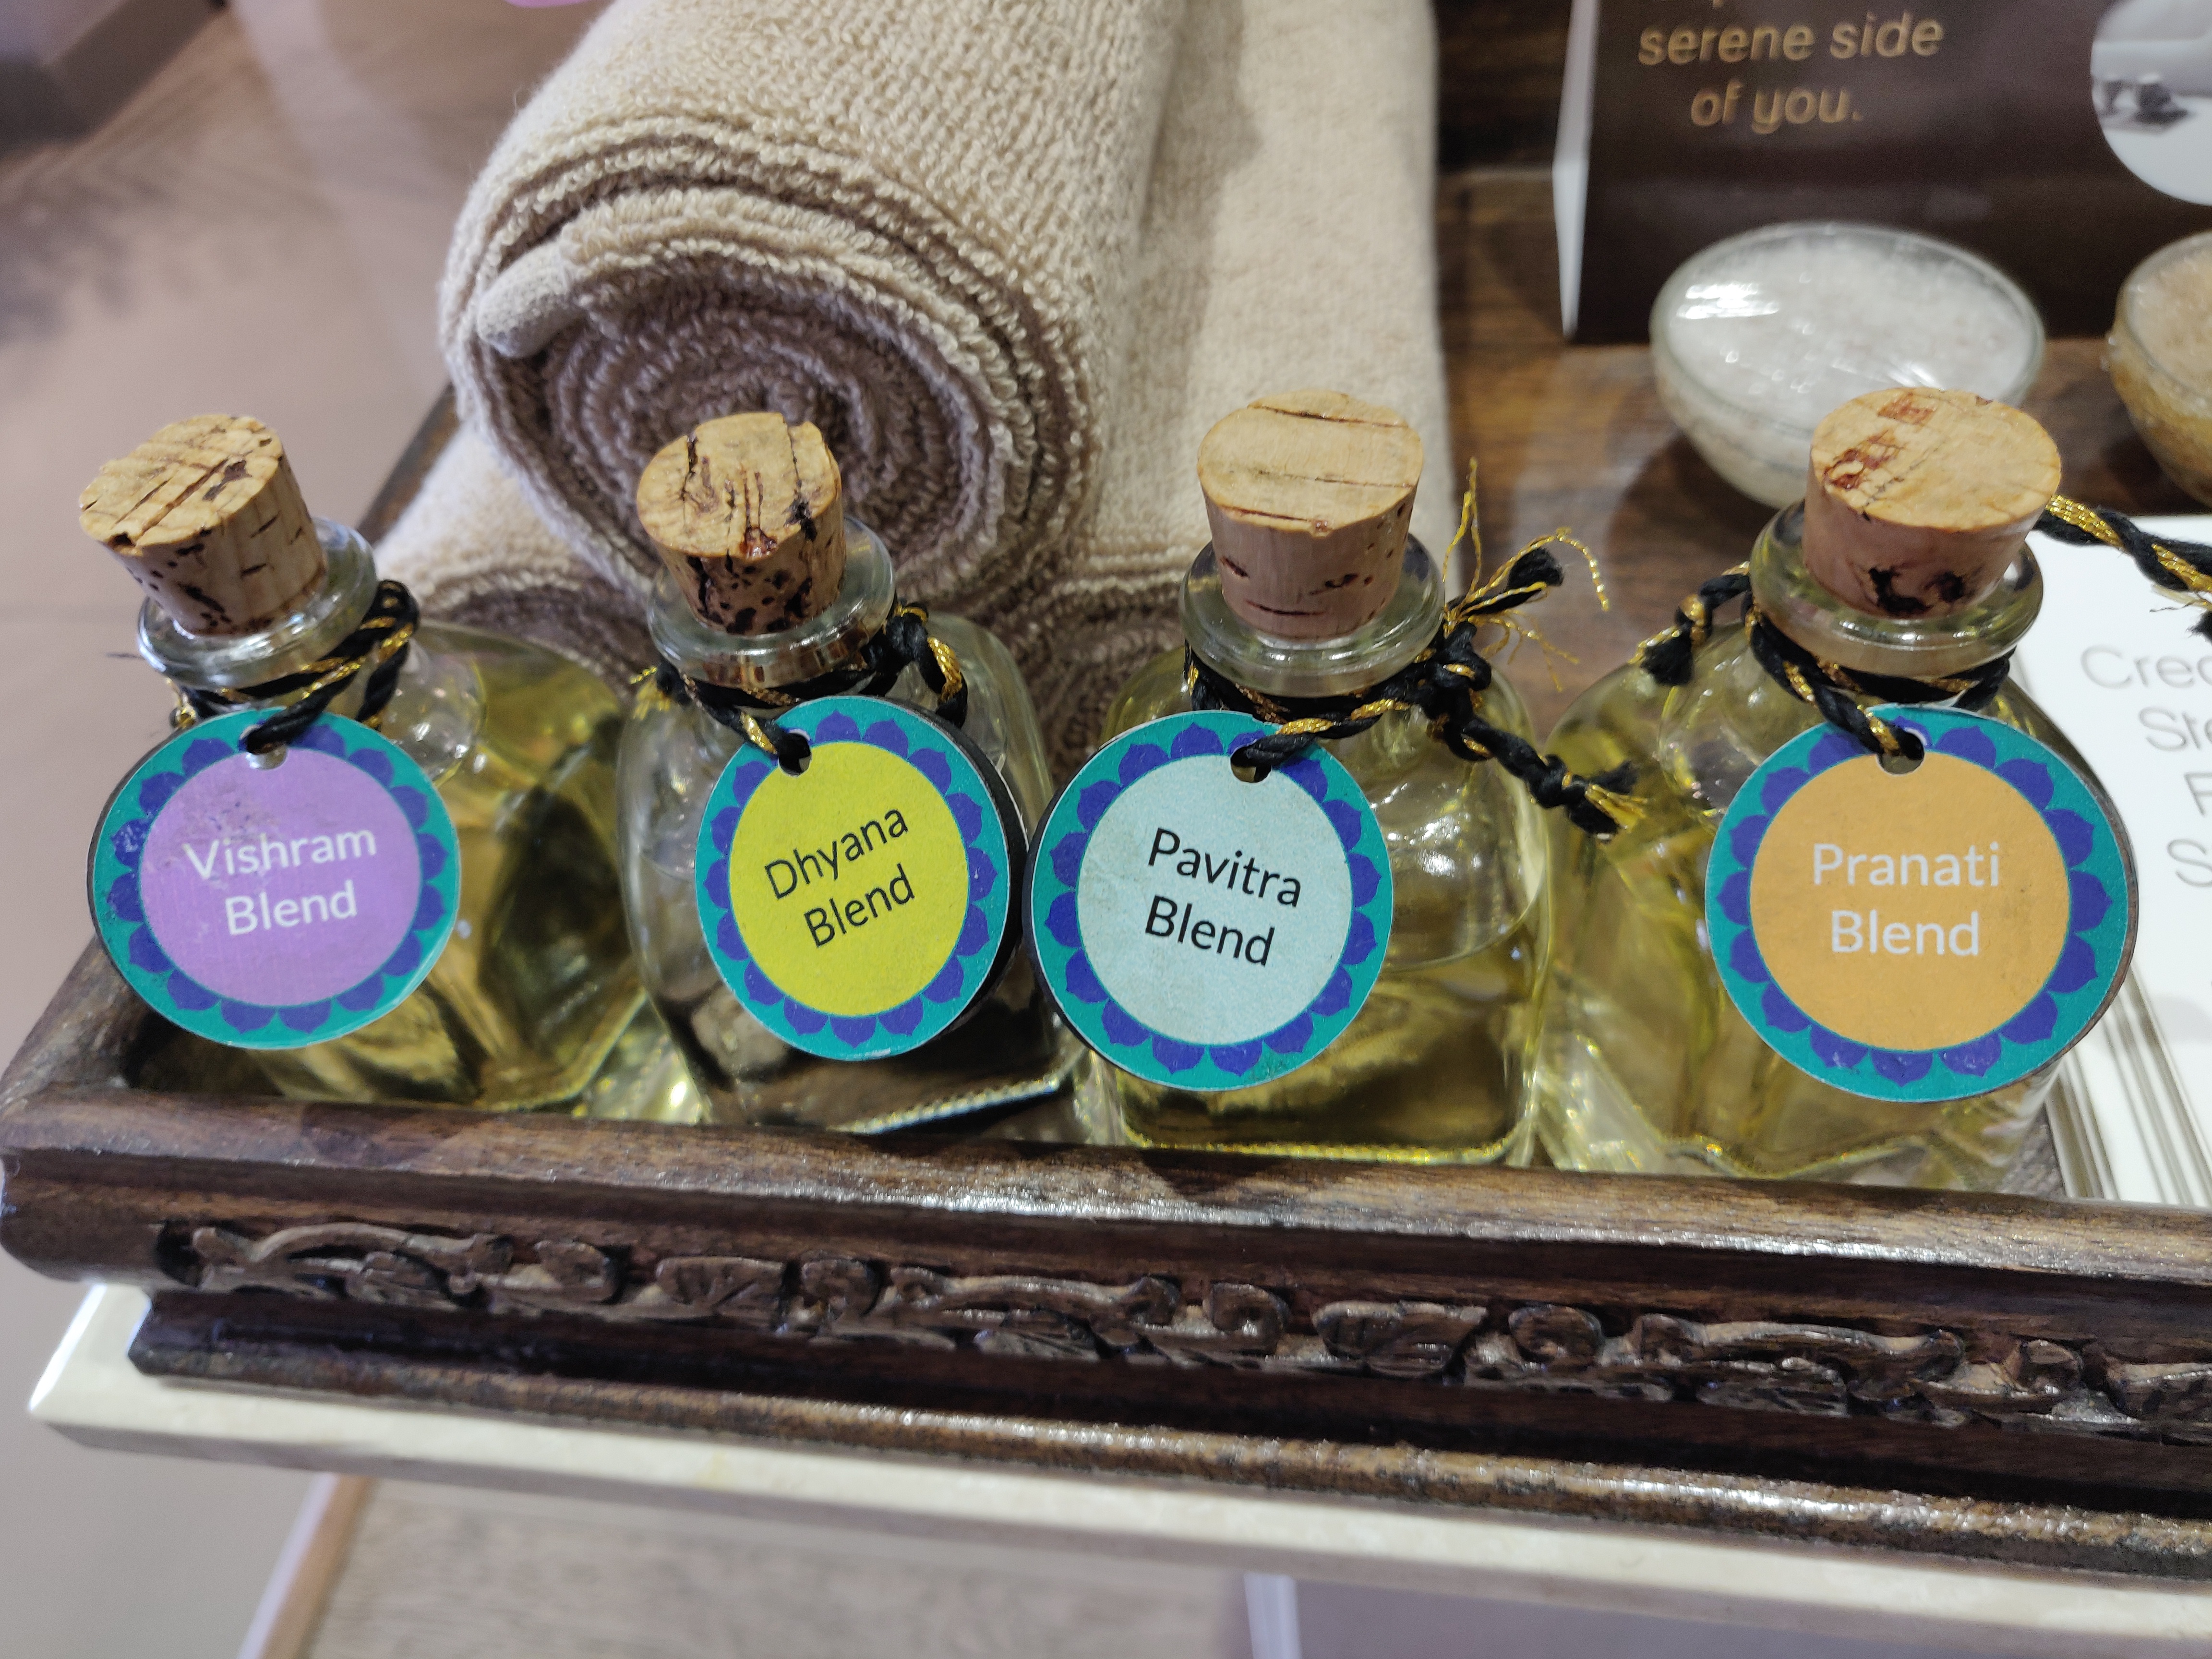 Oils used for the massage